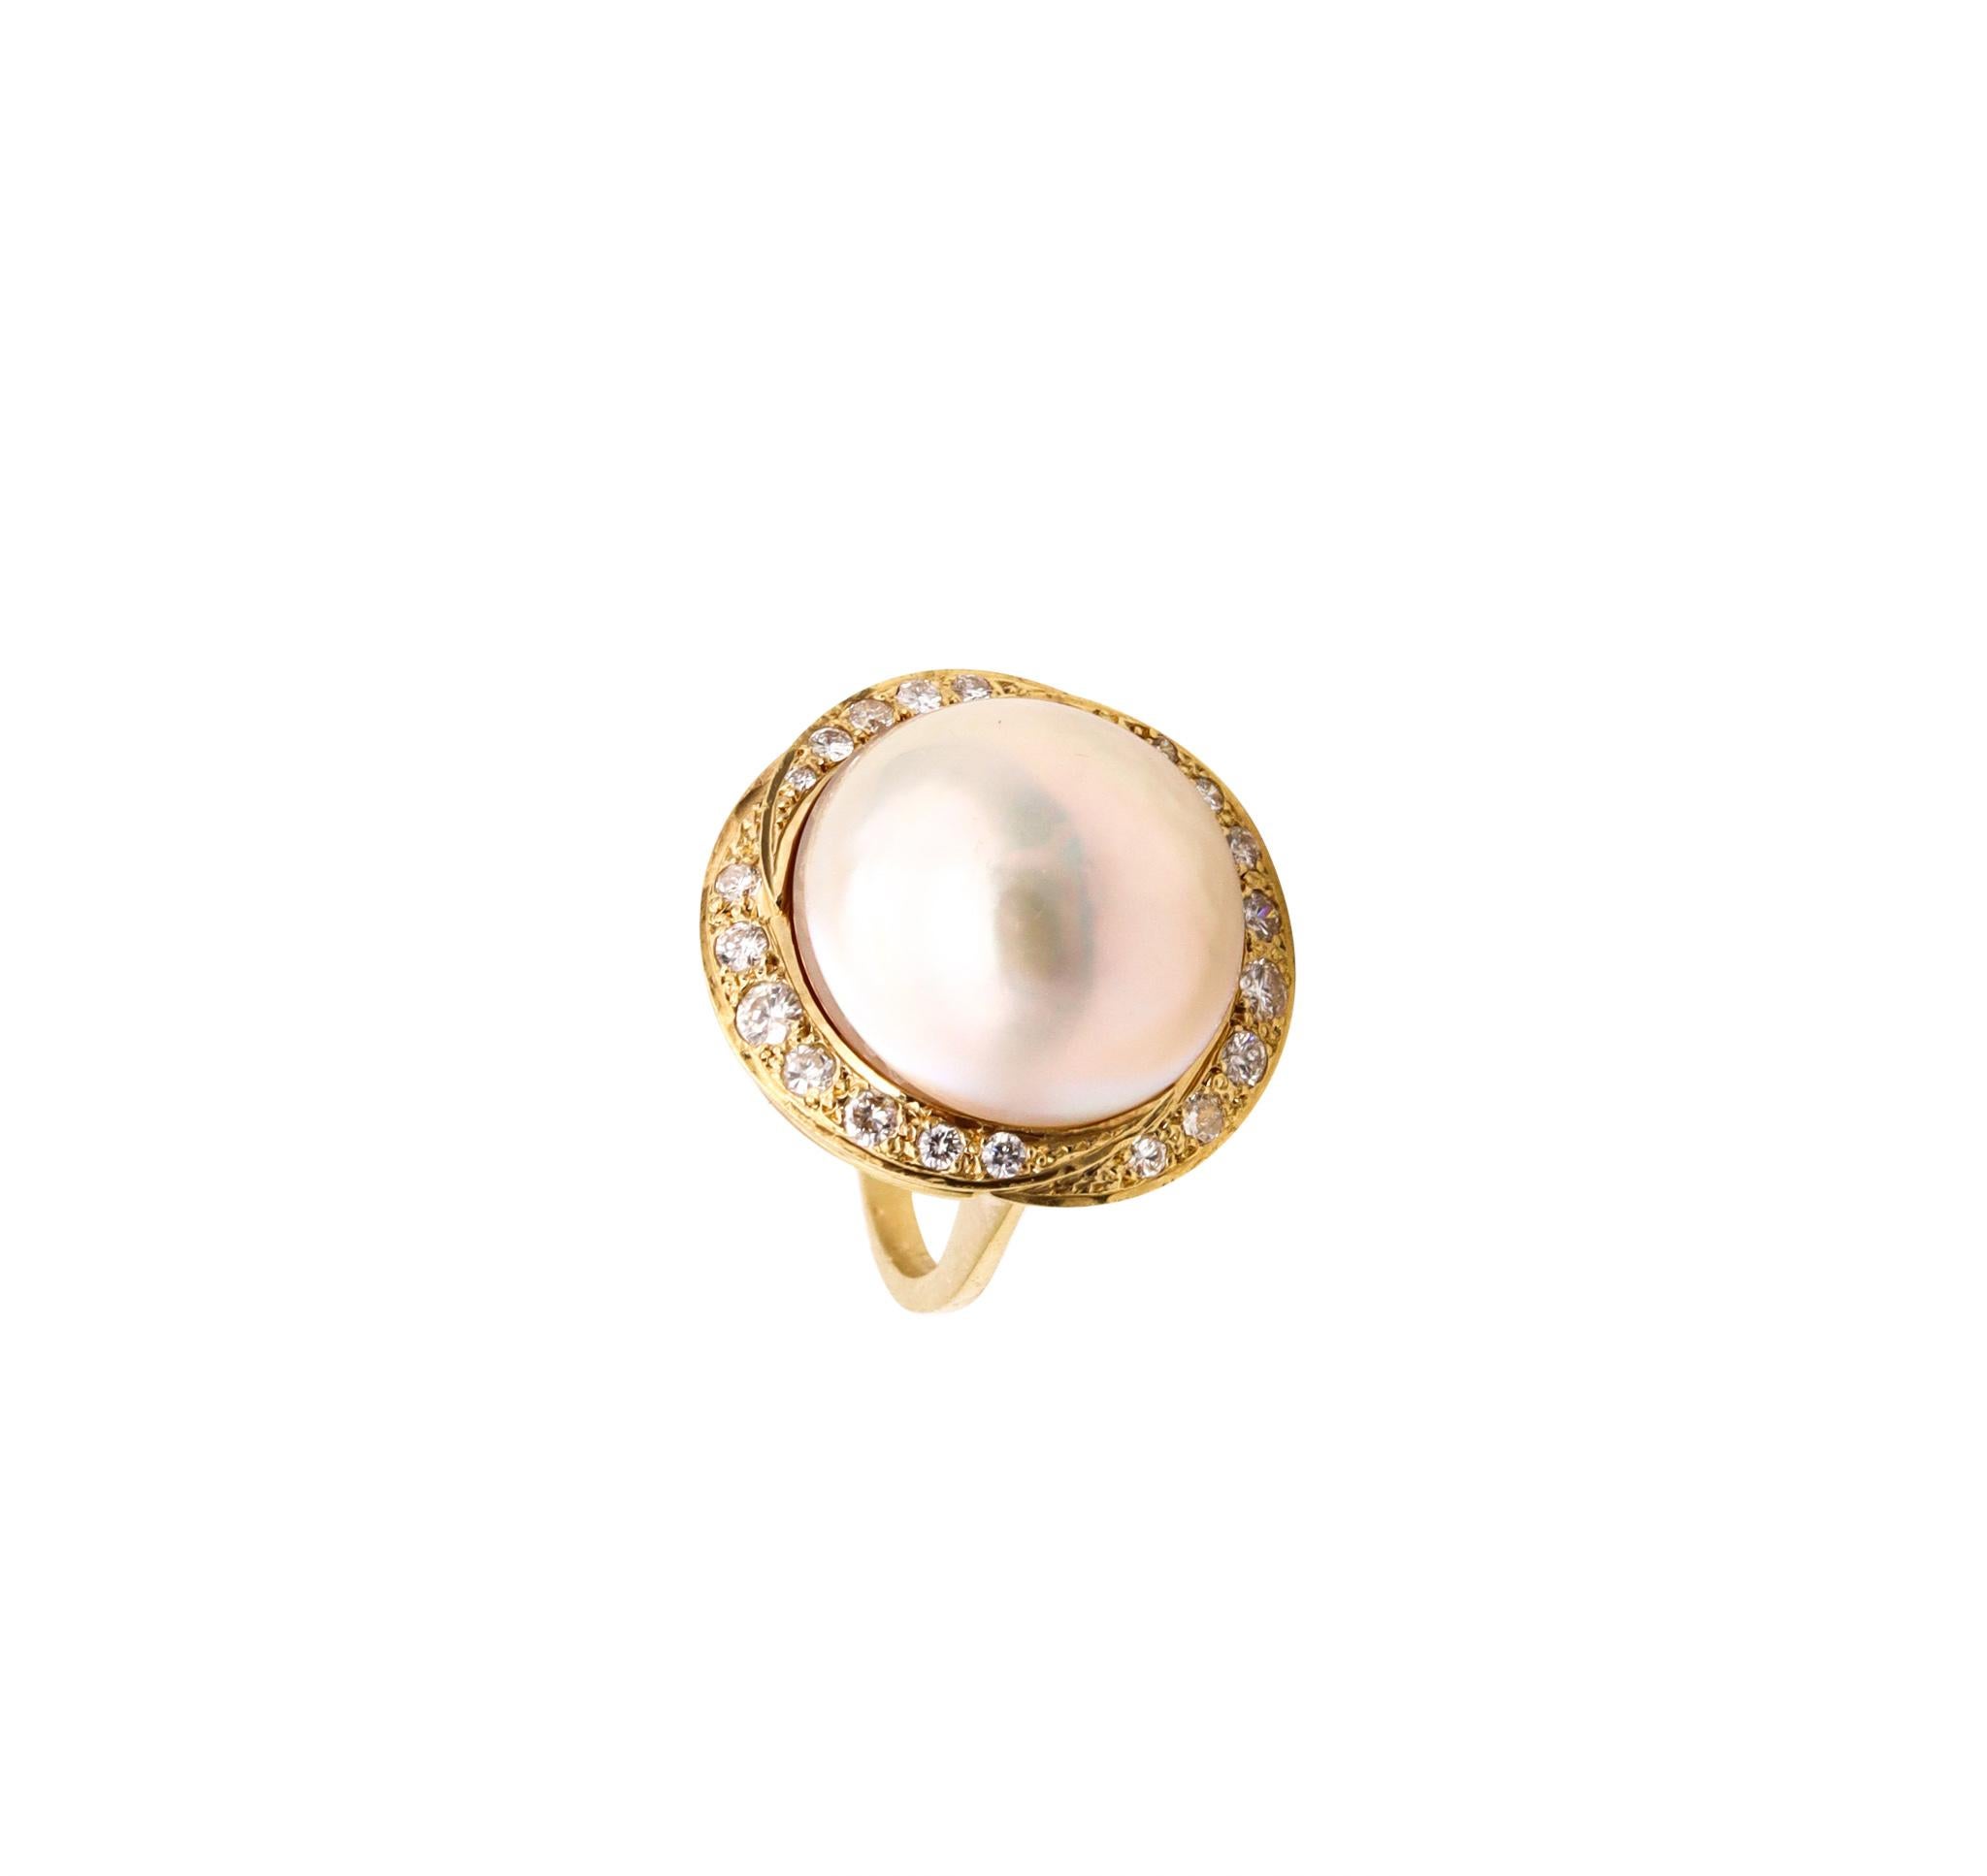 Jeweled cocktail ring with mobe pearl.

A nice designer's ring, created in Italy during the mid-century period, circa 1960. It was crafted in solid yellow gold of 18 karat, with polished finish.

Featuring in the center, a large round white mobe